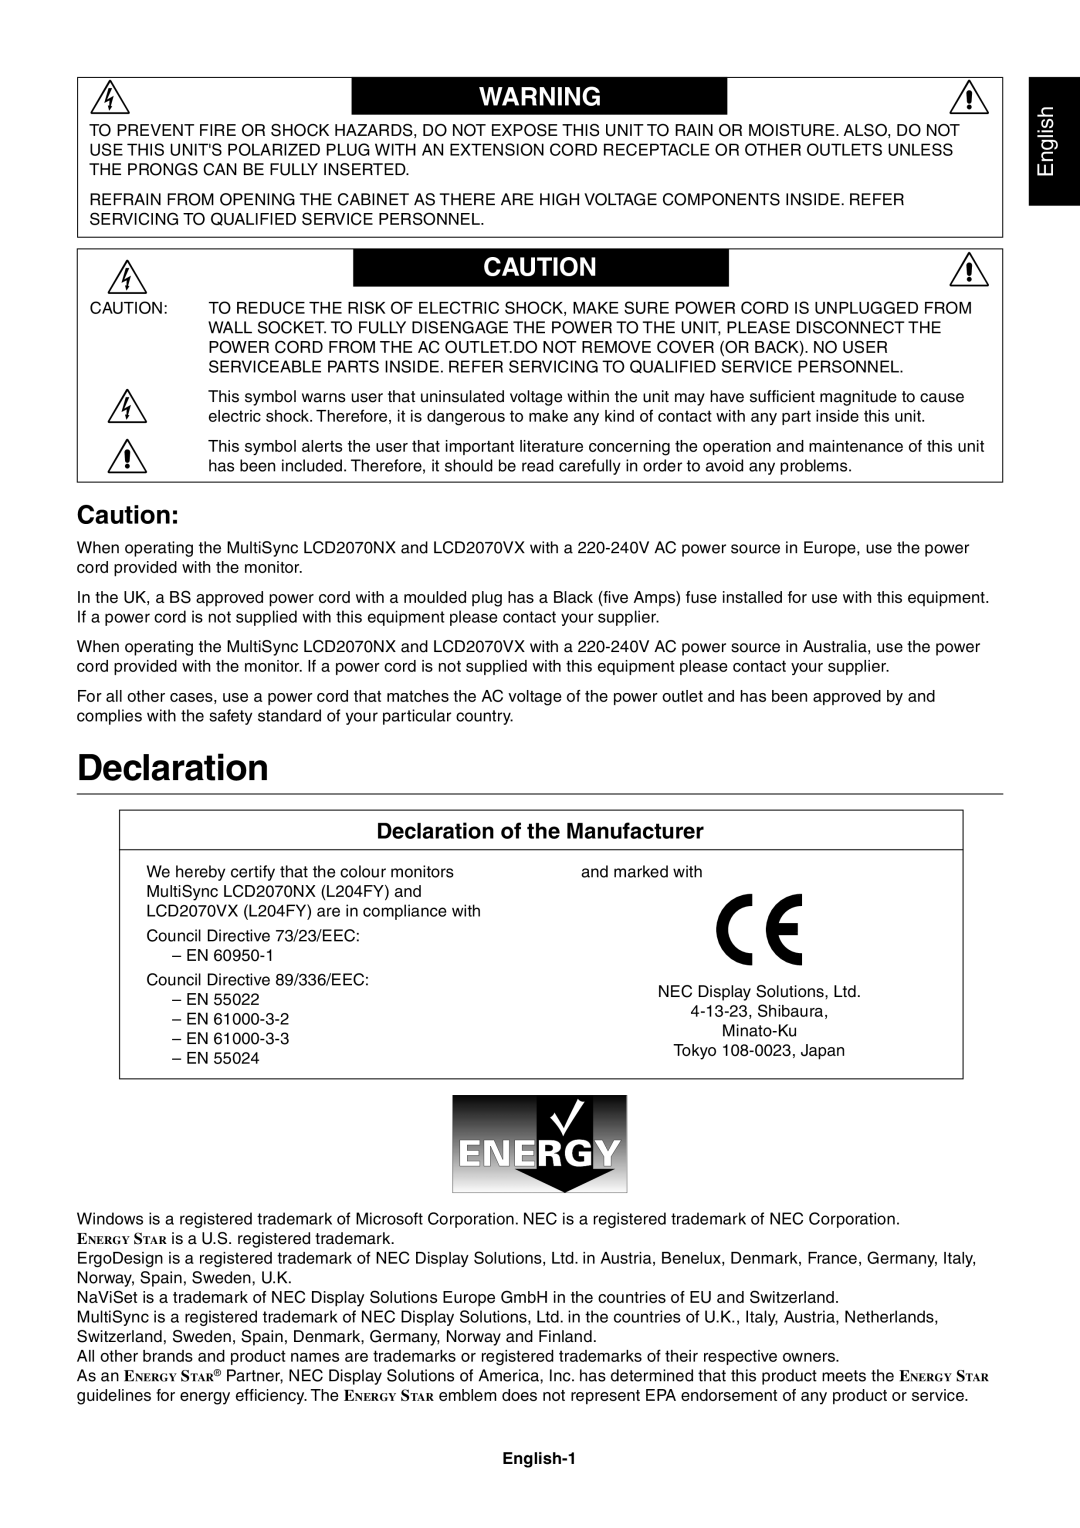 NEC LCD2070NX user manual Declaration of the Manufacturer, English 